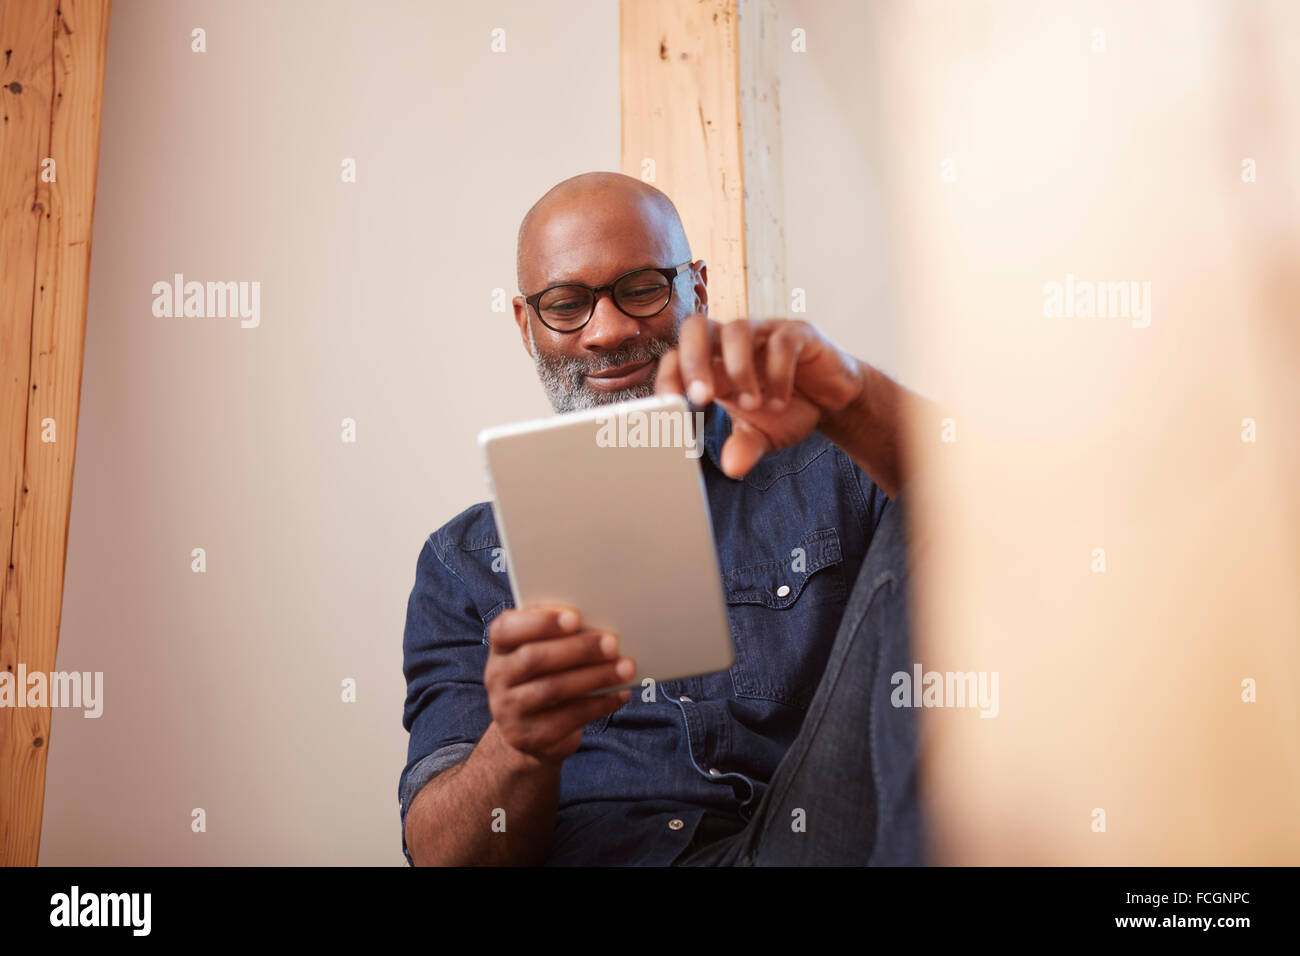 Portrait of smiling man looking at digital tablet Stock Photo